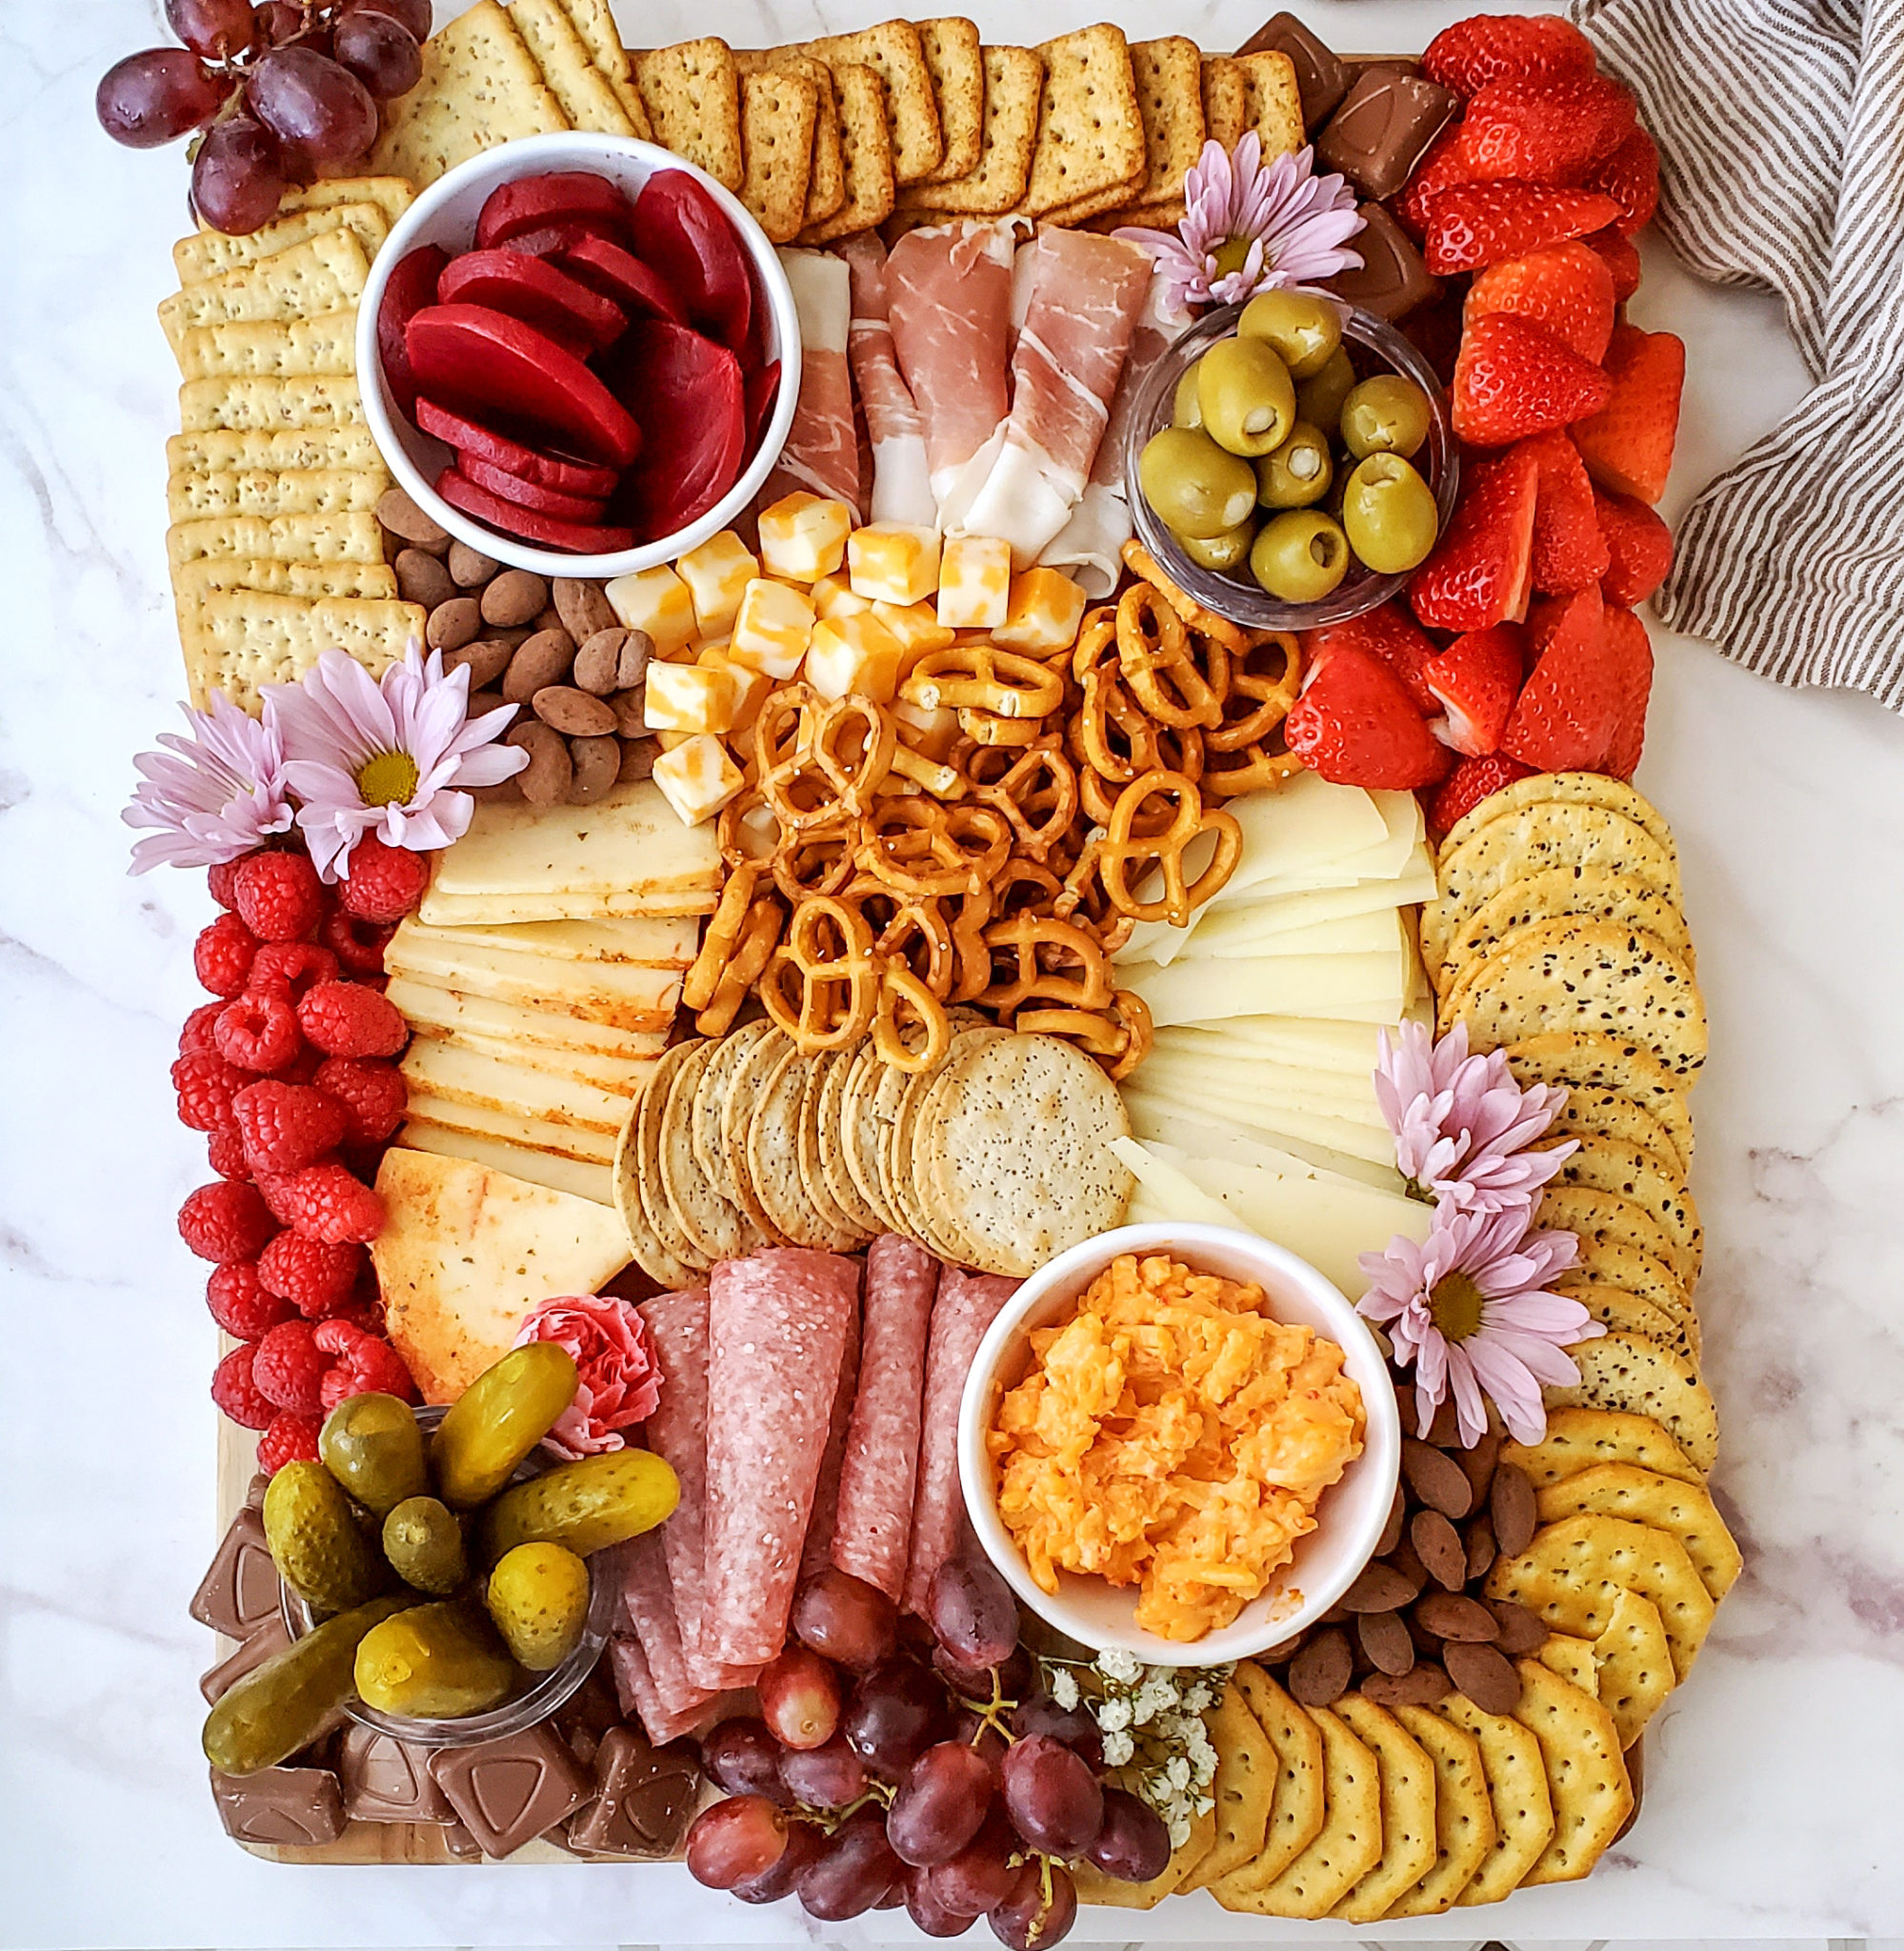 https://www.nelliebellie.com/wp-content/uploads/charcuterie-board8-1-scaled.jpg